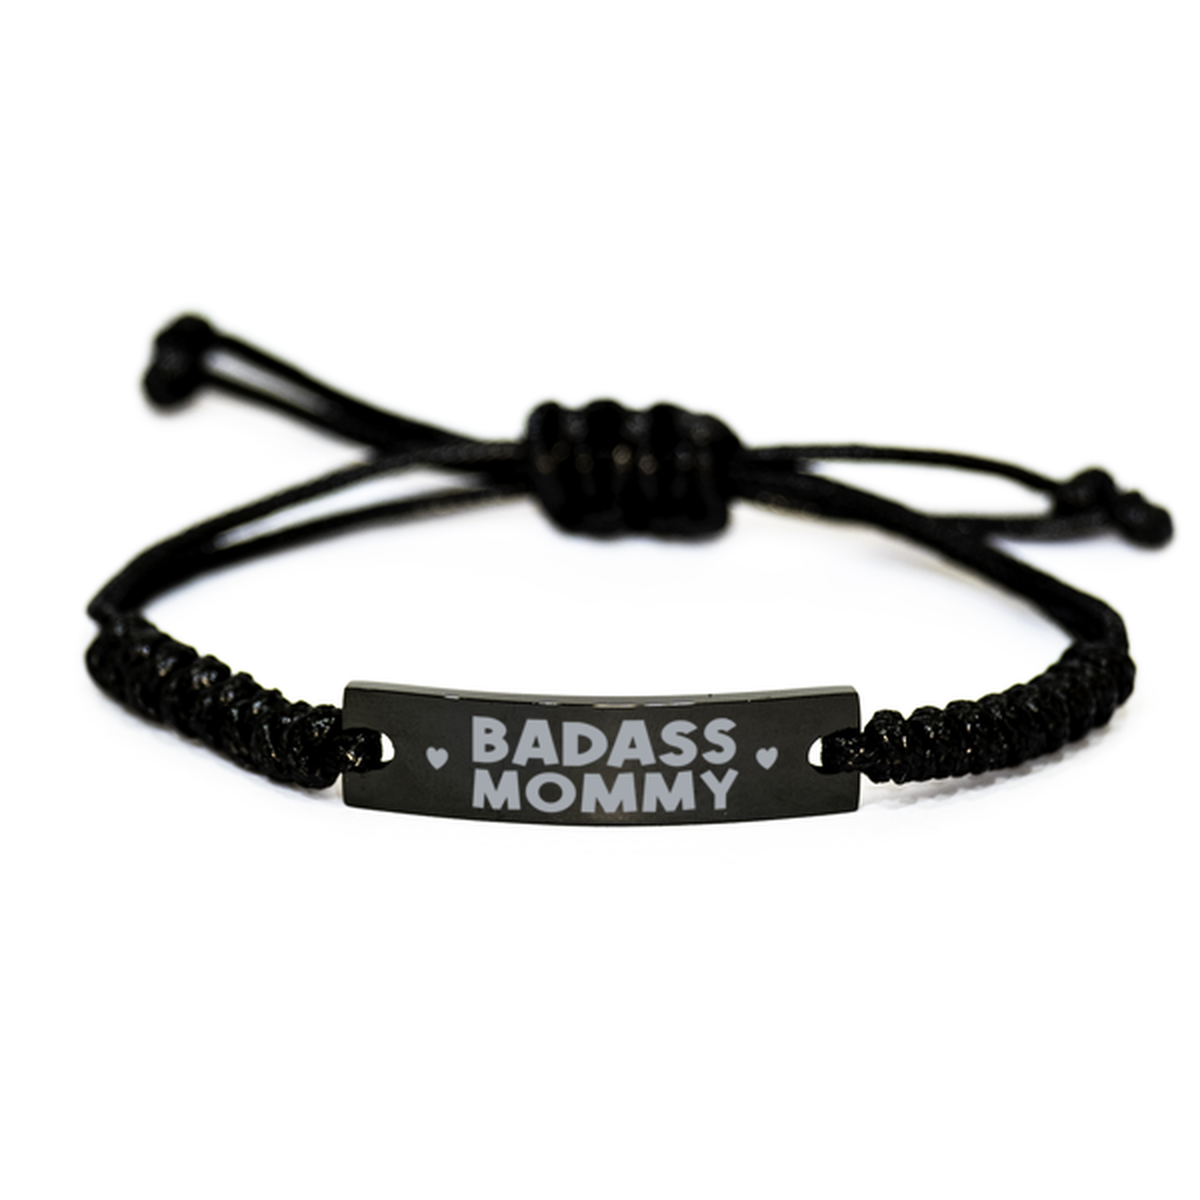 Mommy Rope Bracelet, Badass Mommy, Funny Family Gifts For Mommy From Son Daughter